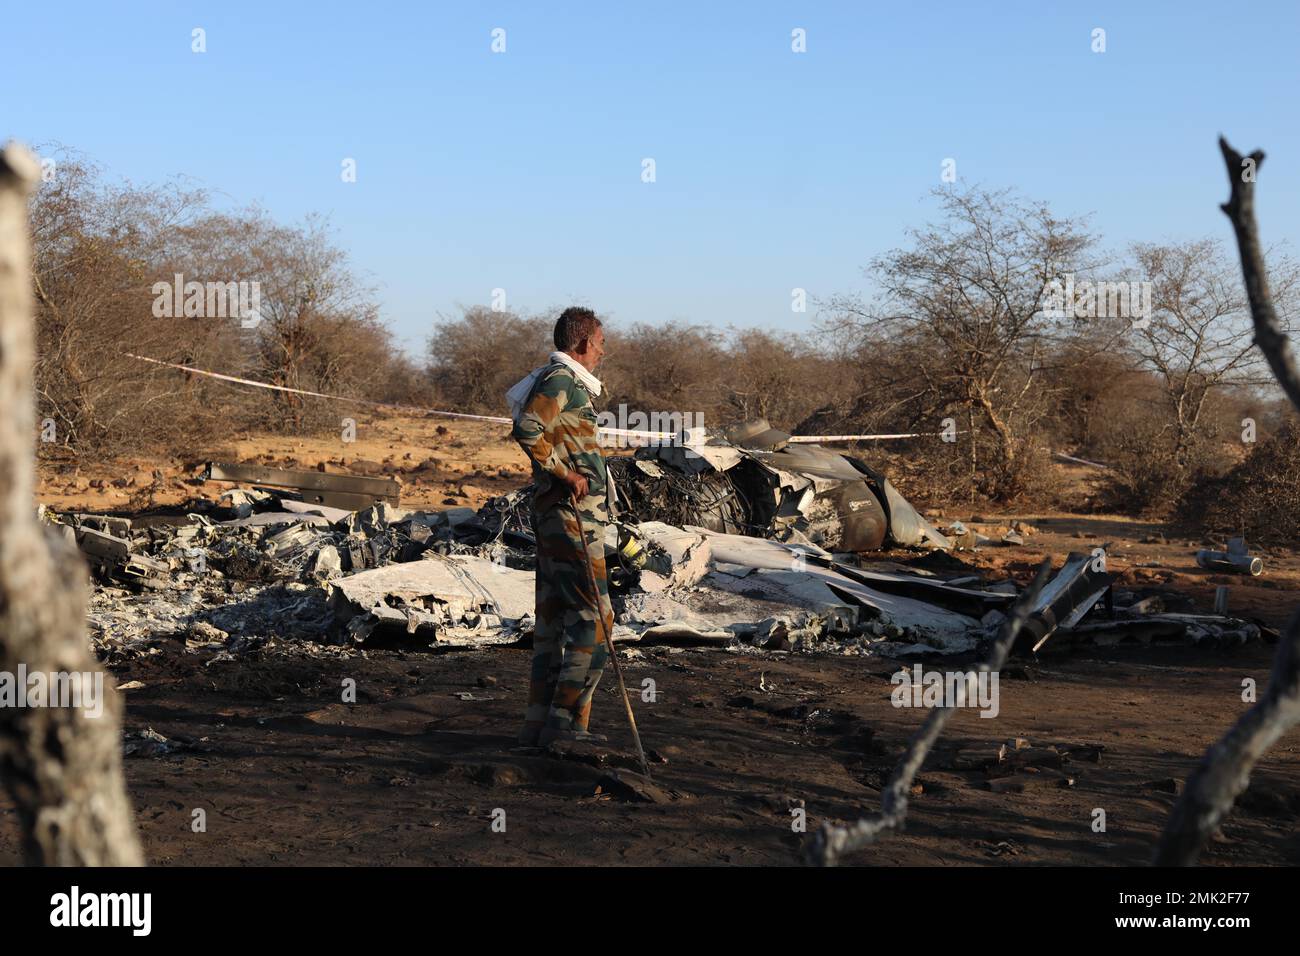 Jabalpur, India. 28th Jan, 2023. Gwalior, Madhya Pradesh, India, January, 28,2023. People stand near the wreckage of an aircraft after a Sukhoi Su-30 and Dassault Mirage 2000 fighter jet crashed during an exercise in Pahargarh area, about 50 kilometers (30 miles) from Gwalior, Madhya Pradesh on January 28, 2023. Police present at the accident site said that there was an apparent mid-air collision during the exercise on 28 January. Photo By - Uma Shankar Mishra Credit: River Ganga/Alamy Live News Stock Photo